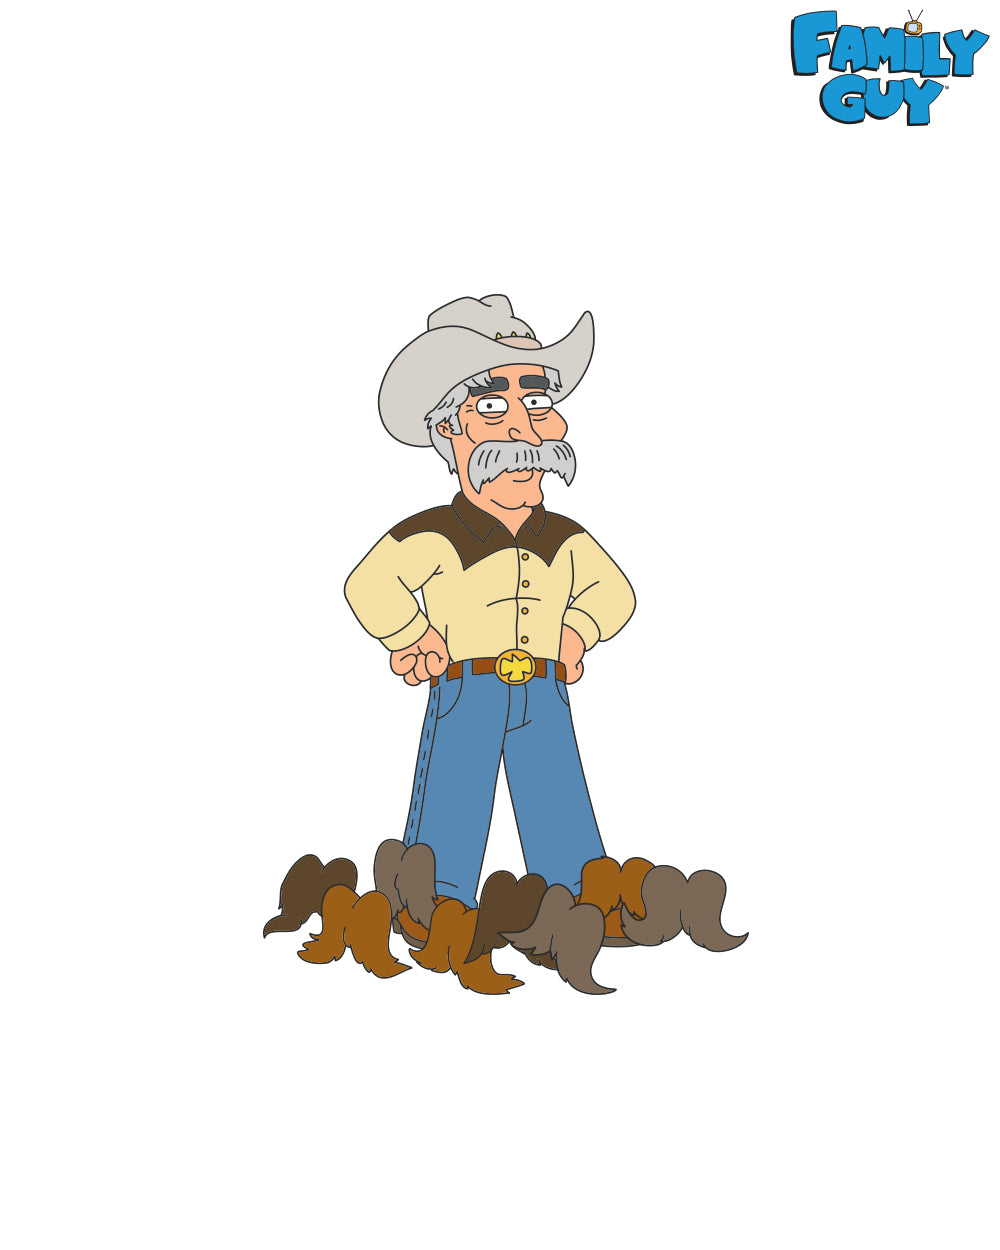 2021 Family Guy Wild West pin (limited edition of 125) (pre-order, ships 8/15-8/30)